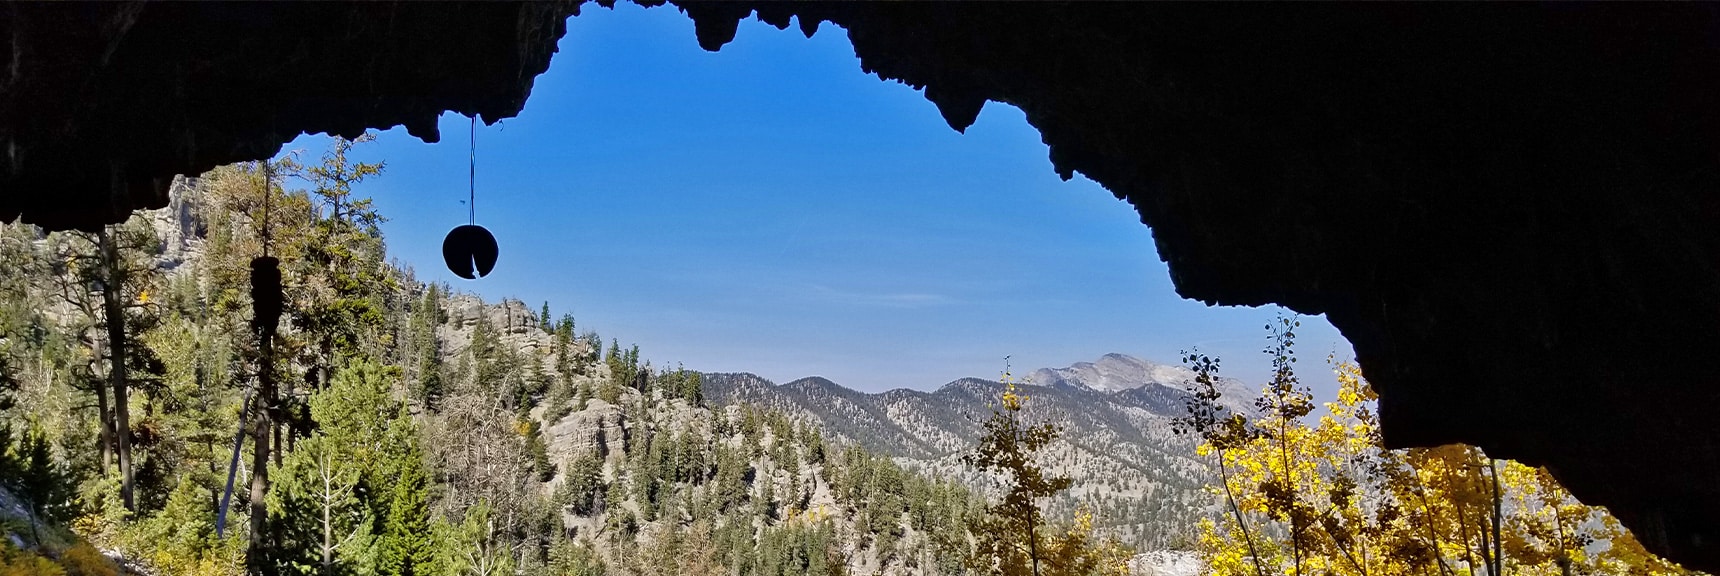 View from Foxtail Springs Cave, Girl Scouts Ornaments Hanging| Foxtail Canyon | Foxtail Girl Scouts Camp | Mt Charleston Wilderness | Spring Mountains, Nevada